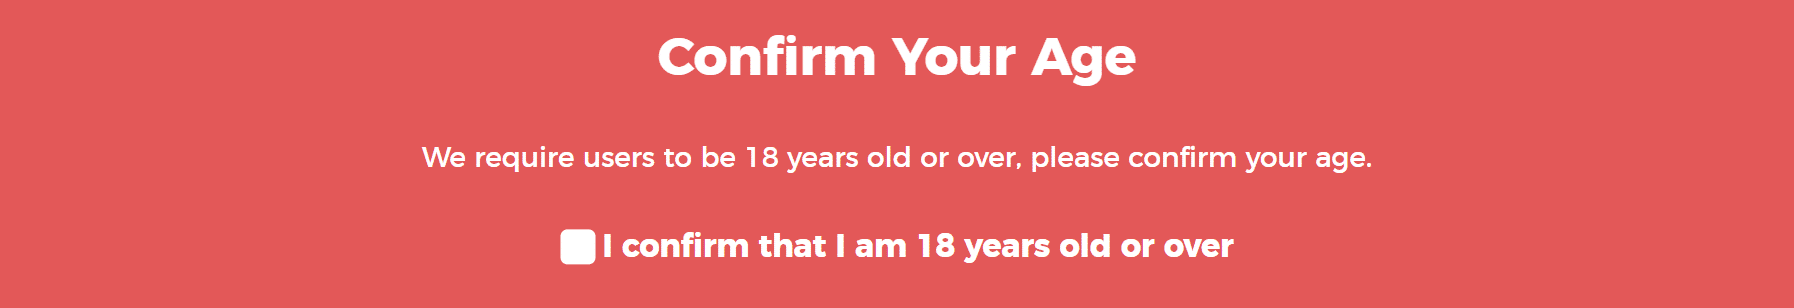 confirm age in wordpress